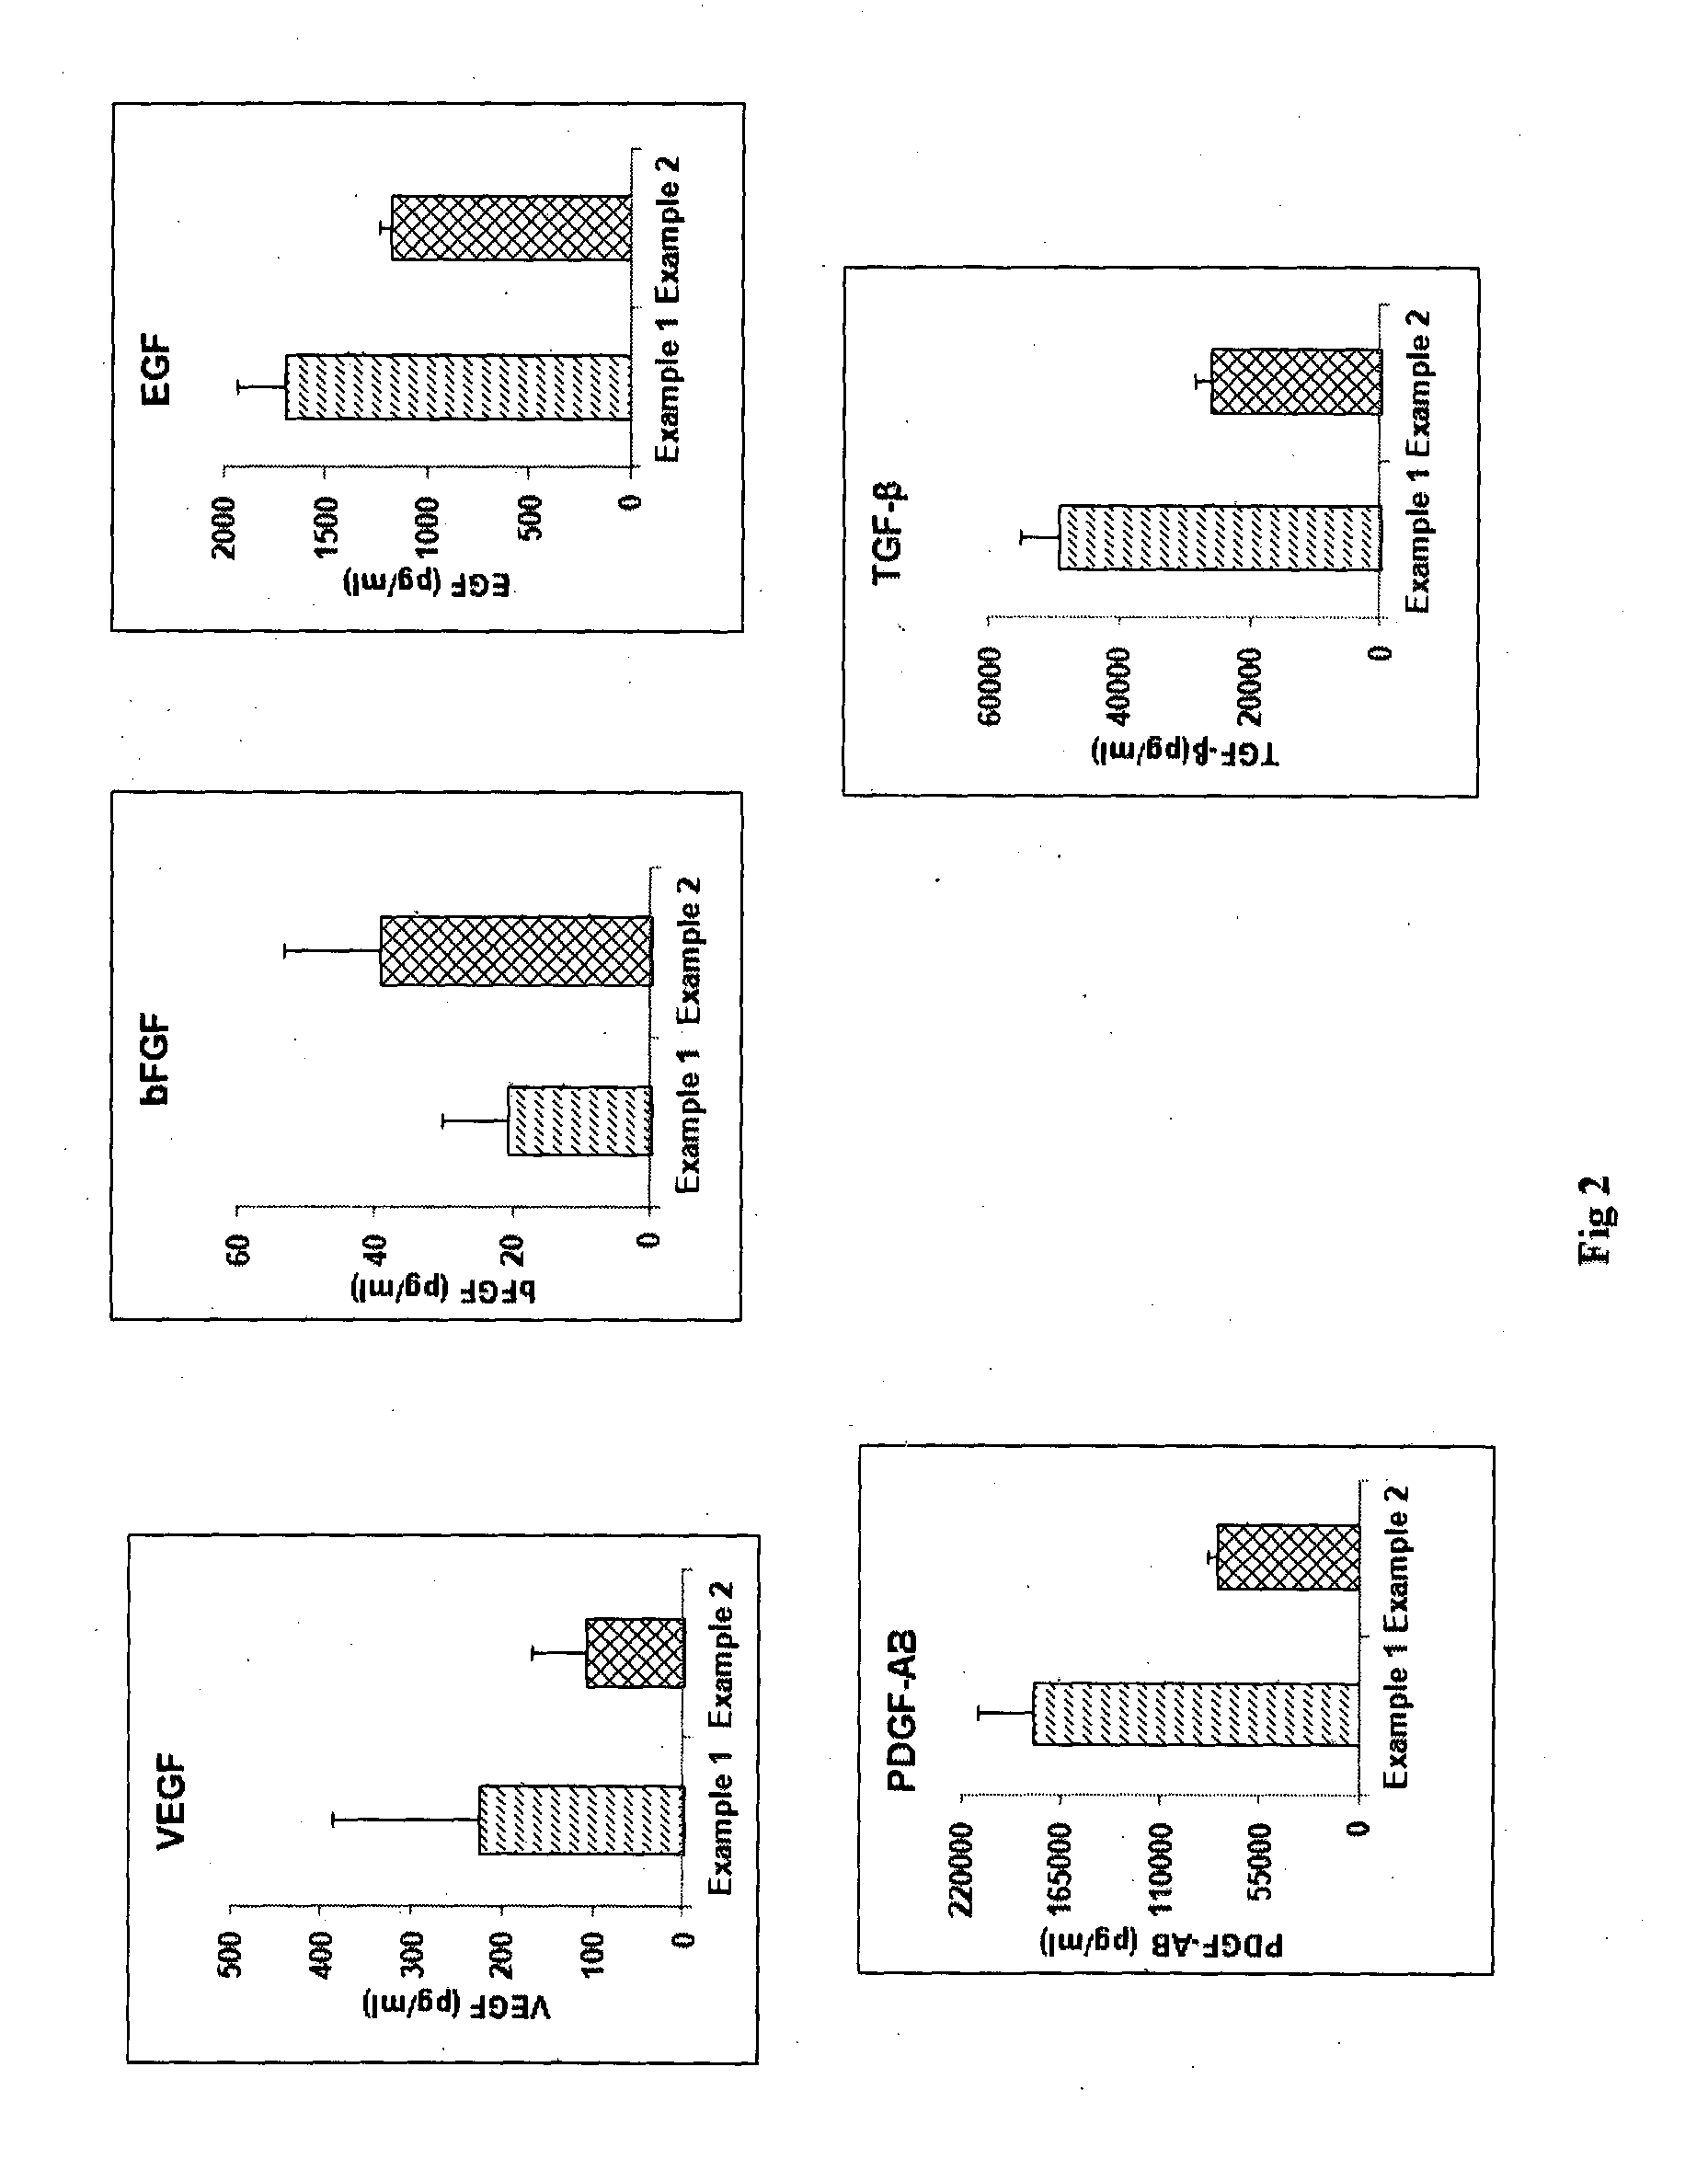 Method of preparing a growth factor concentrate derived from human platelets